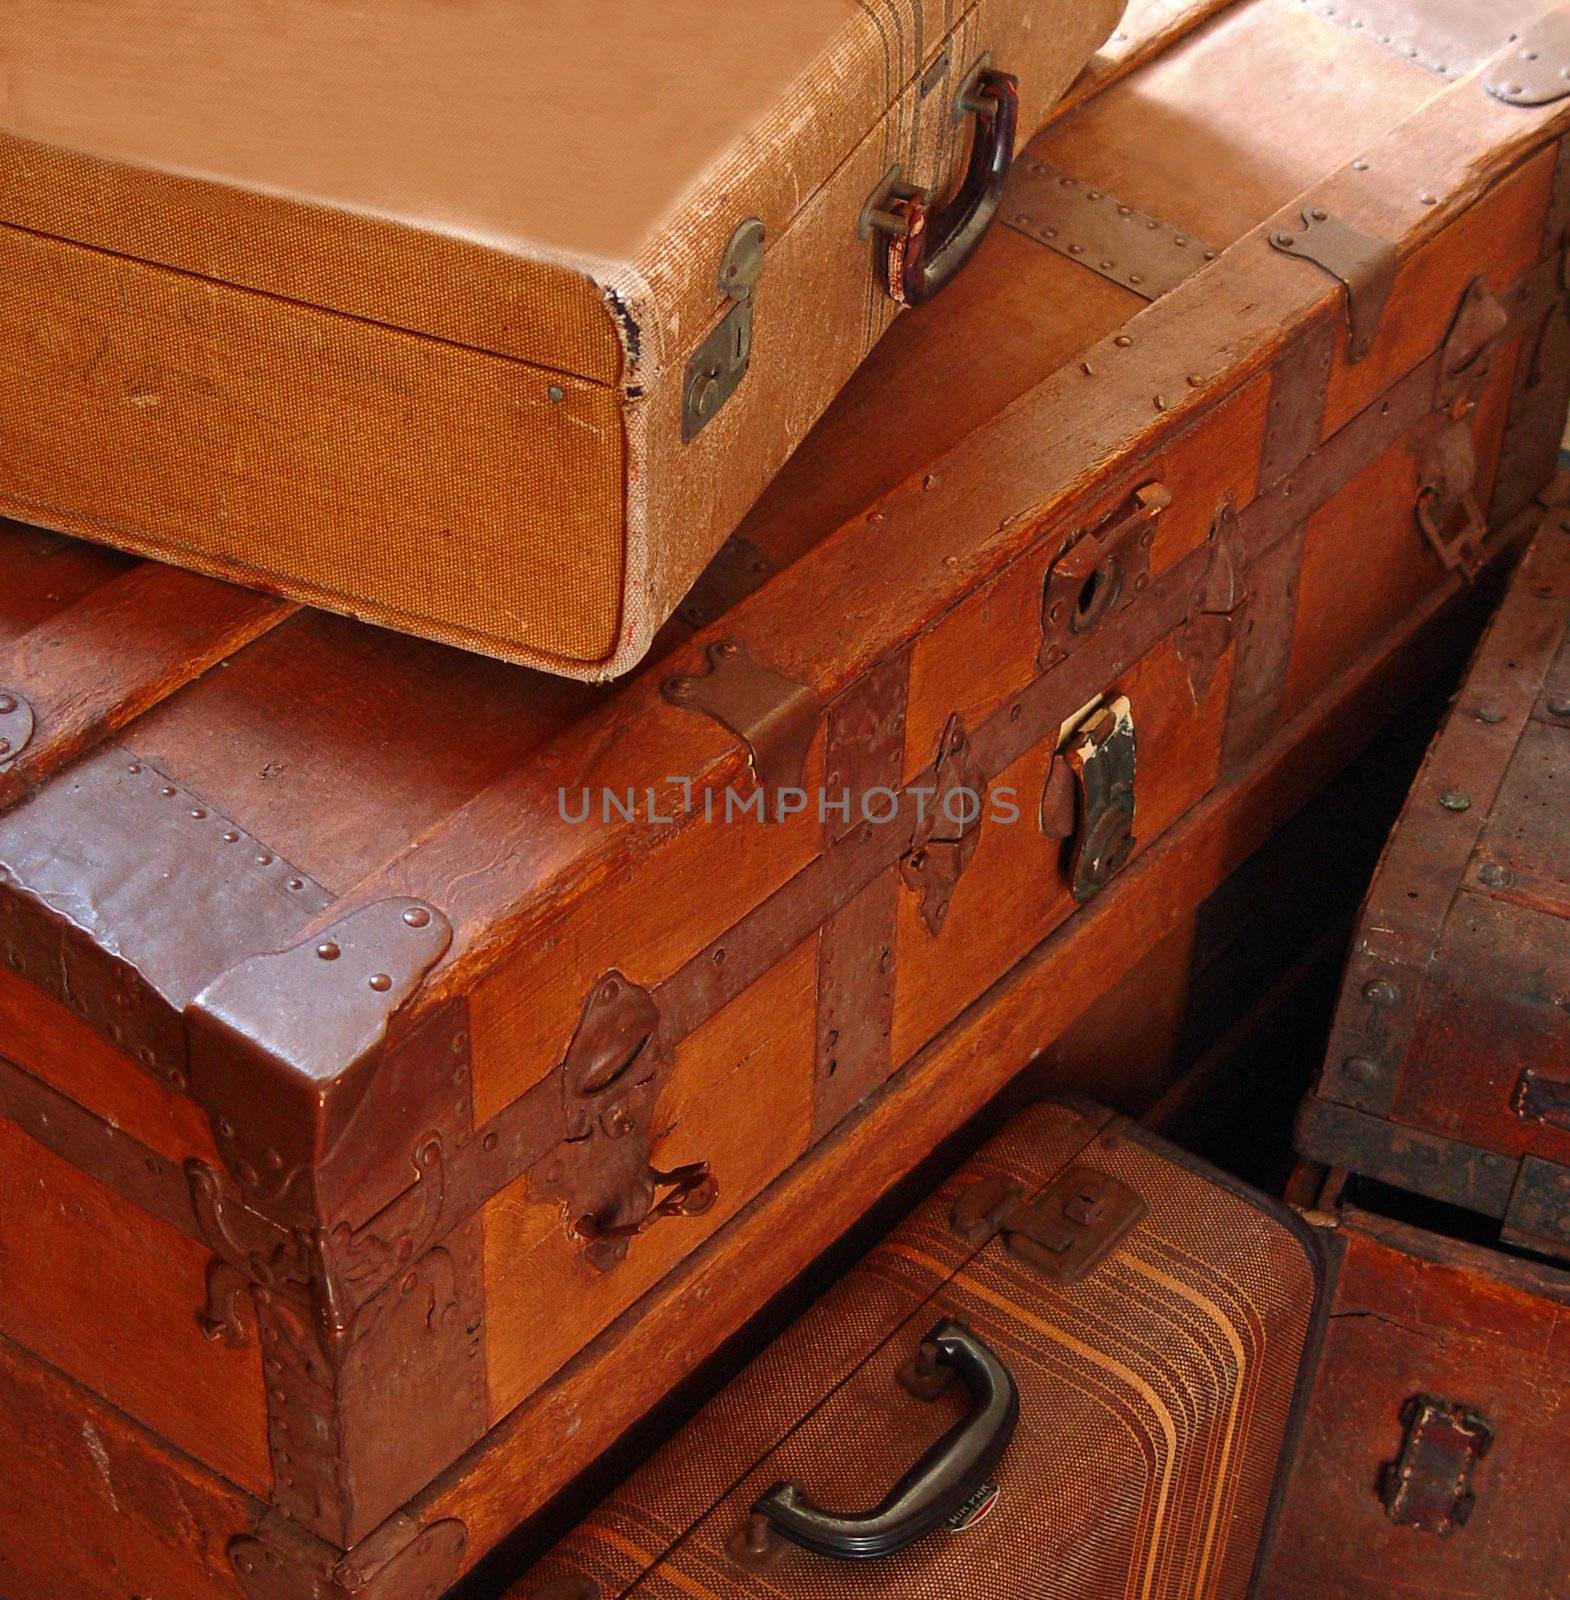 Antique travel trunks by Markjay